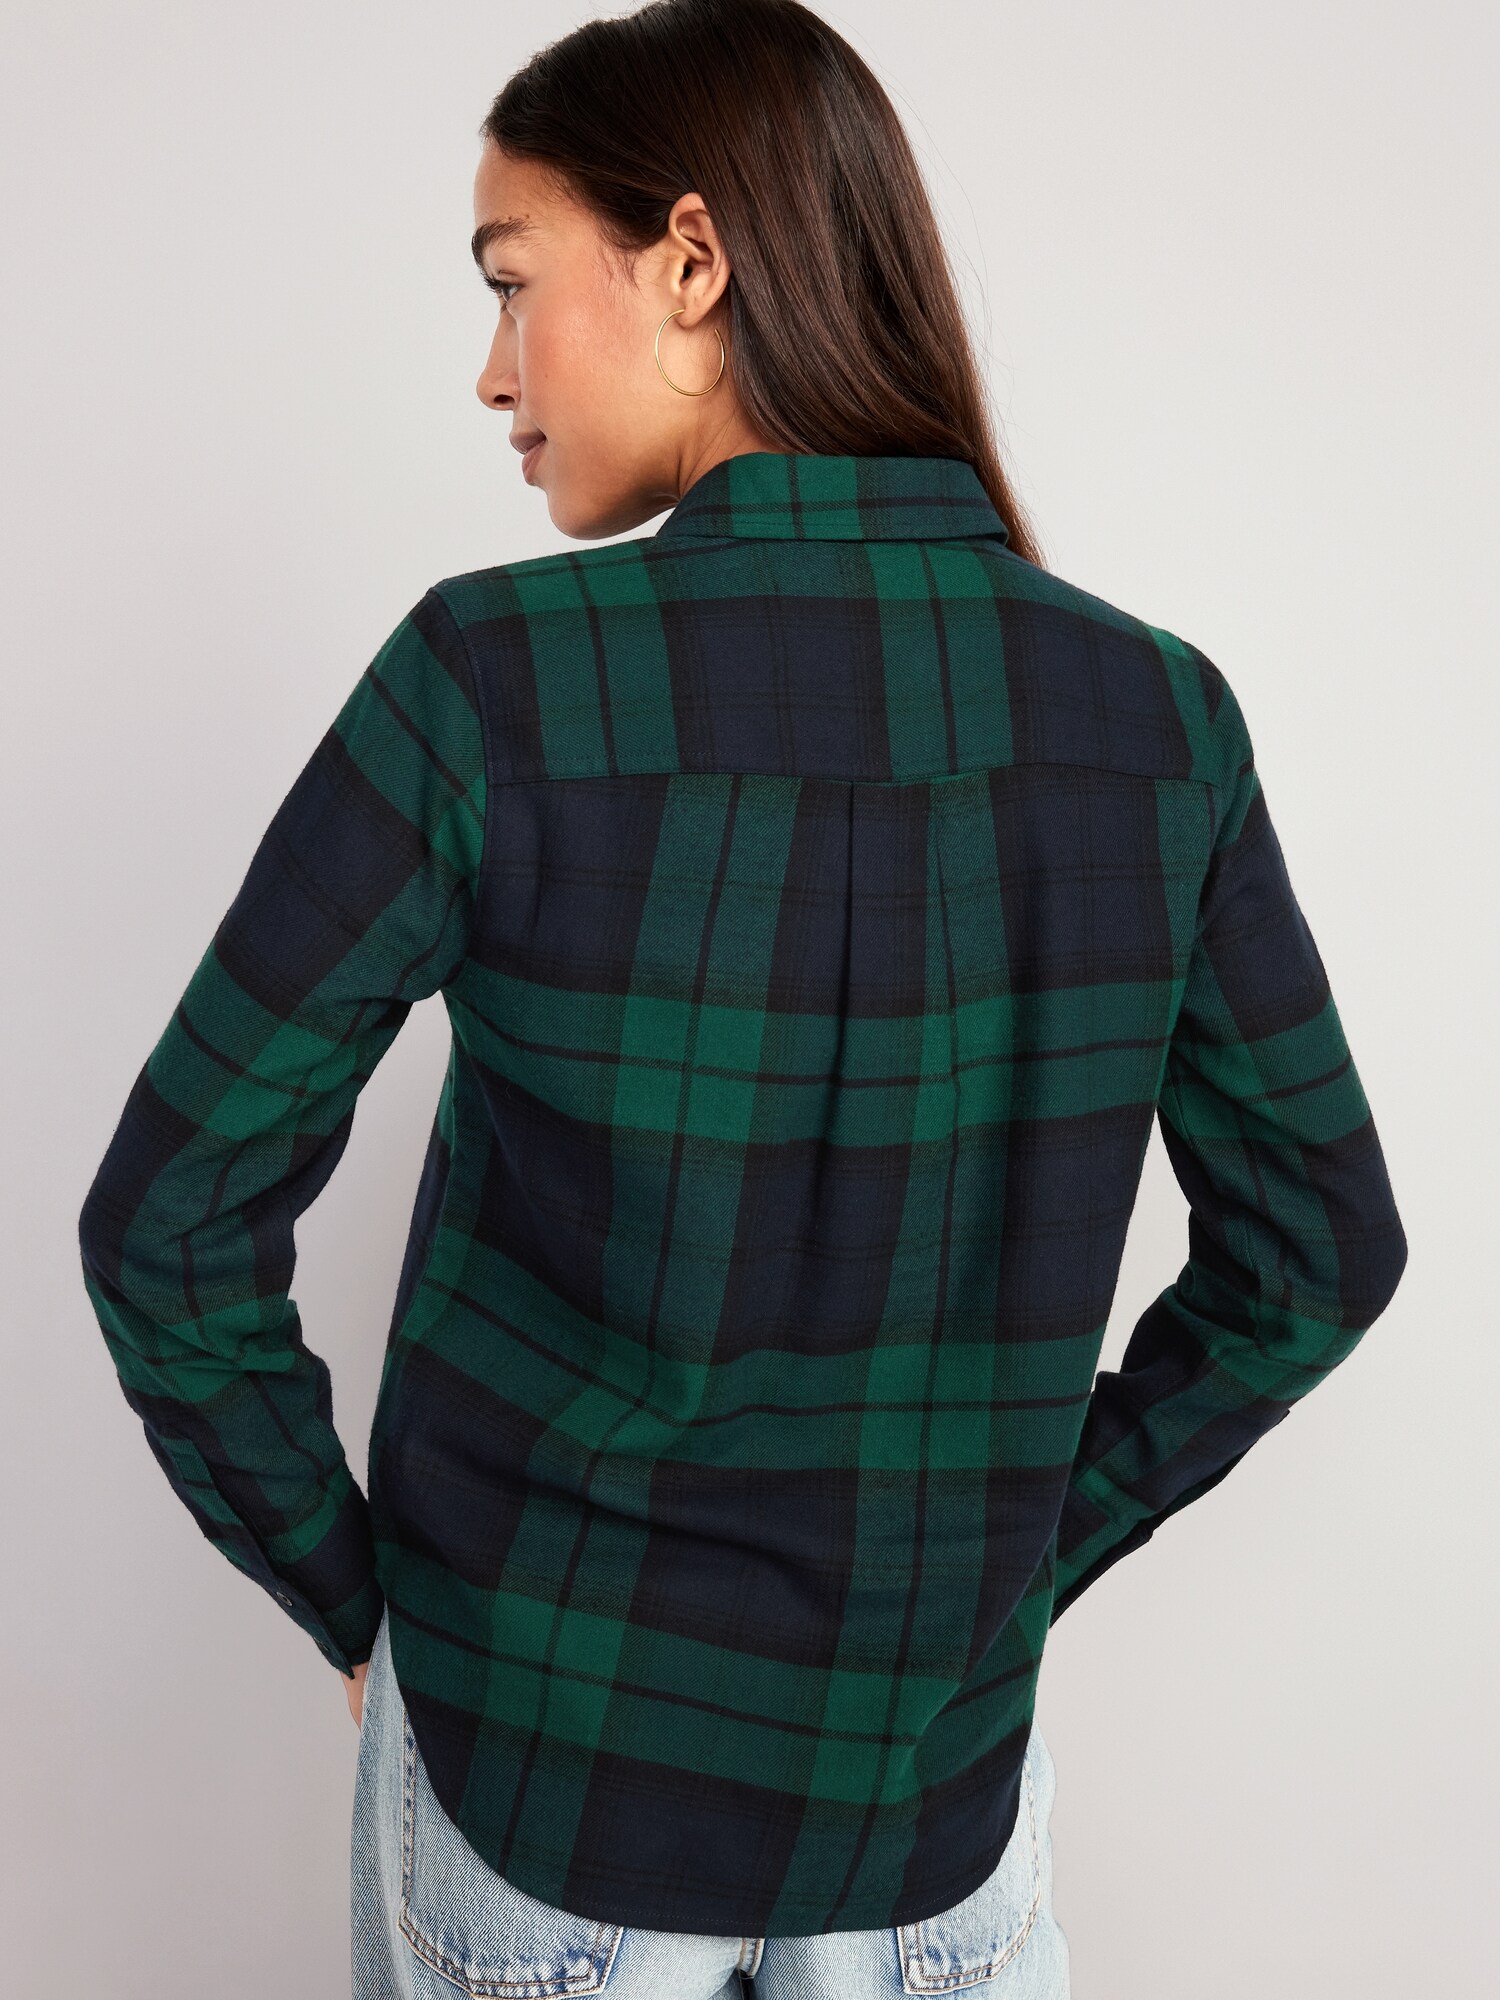 Relaxed Classic Flannel Shirt for Women